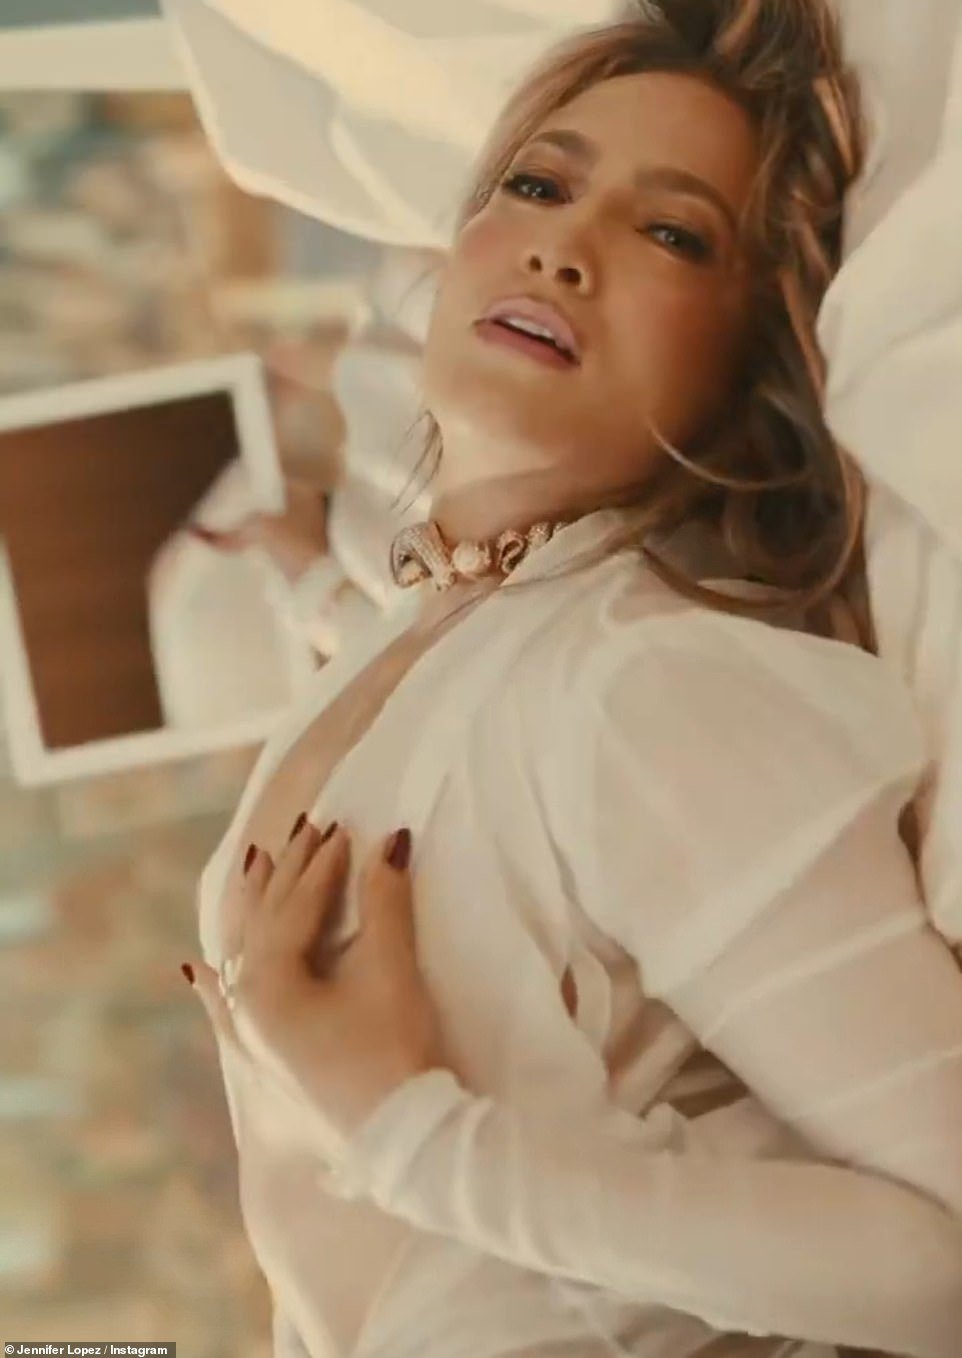 The hitmaker is also seen touching her chest while wearing a white outfit